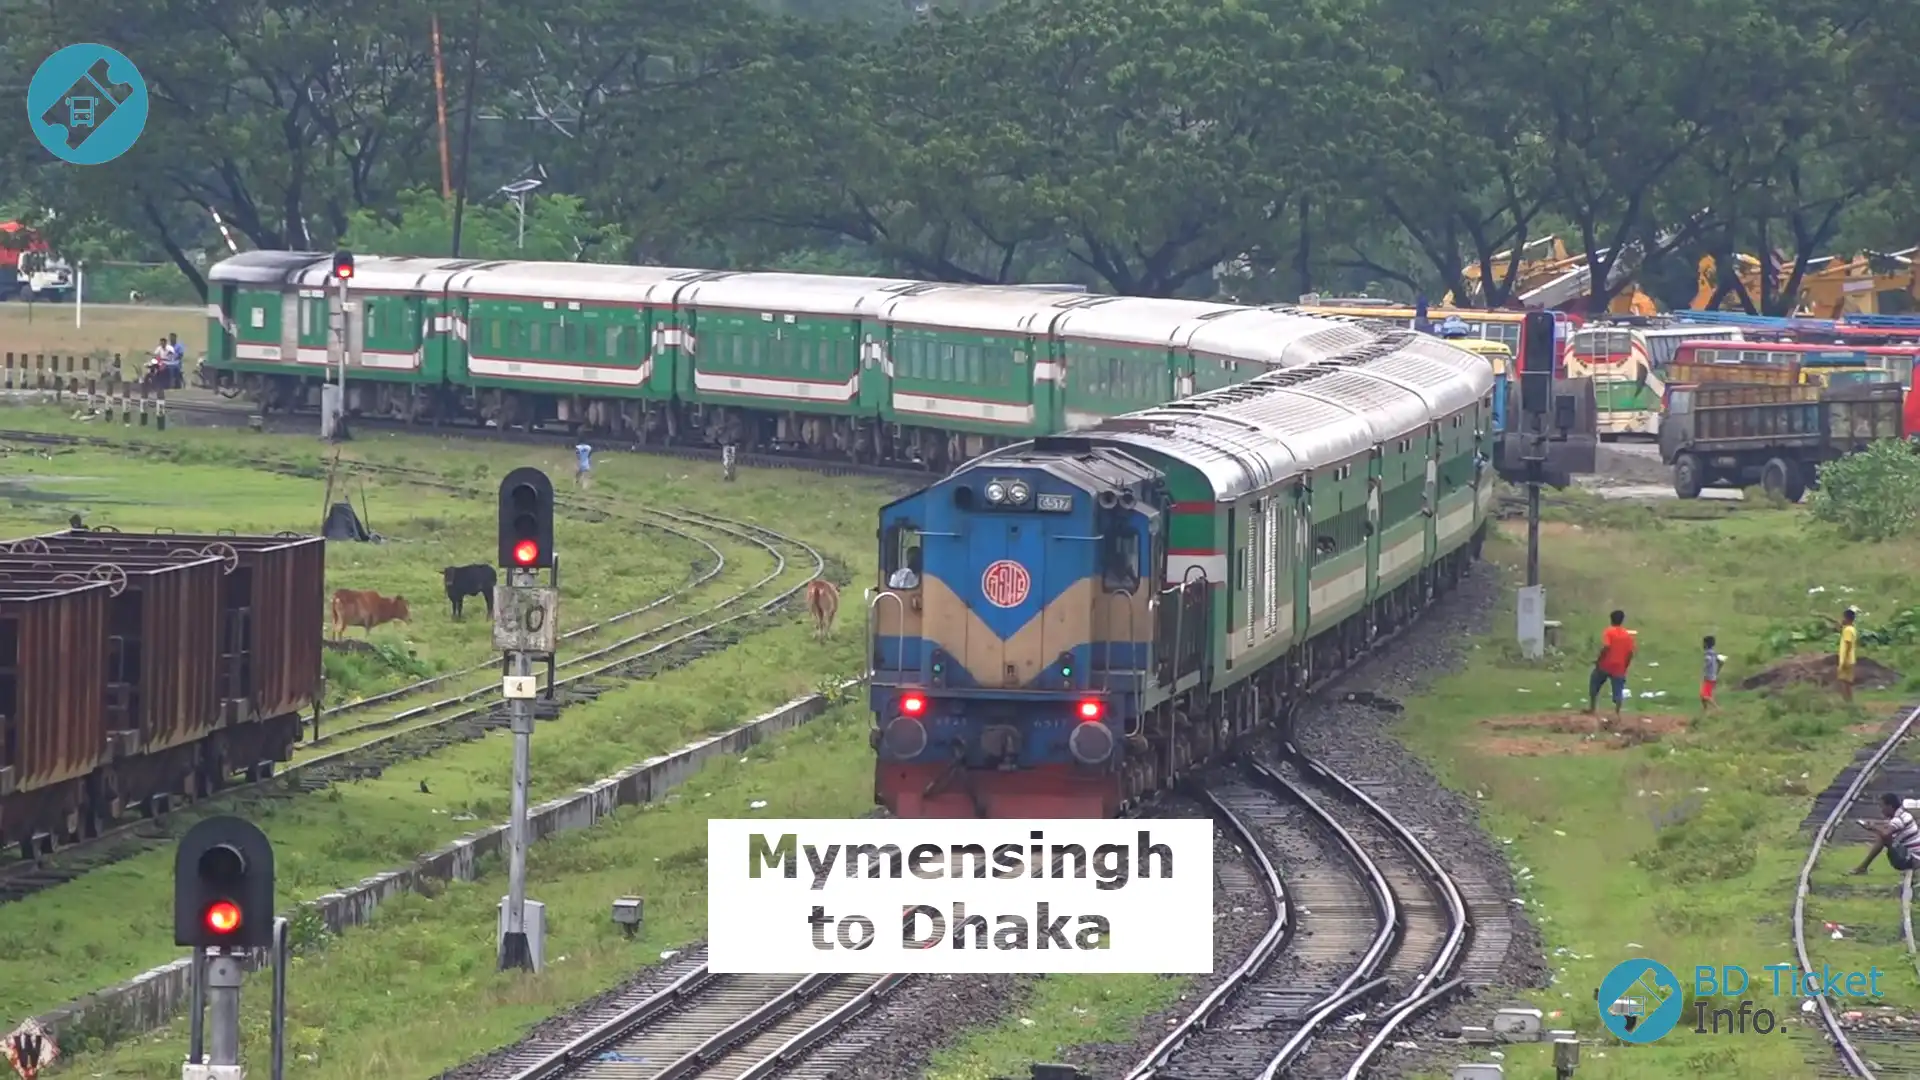 Mymensingh to Dhaka Train Schedule and Ticket Price